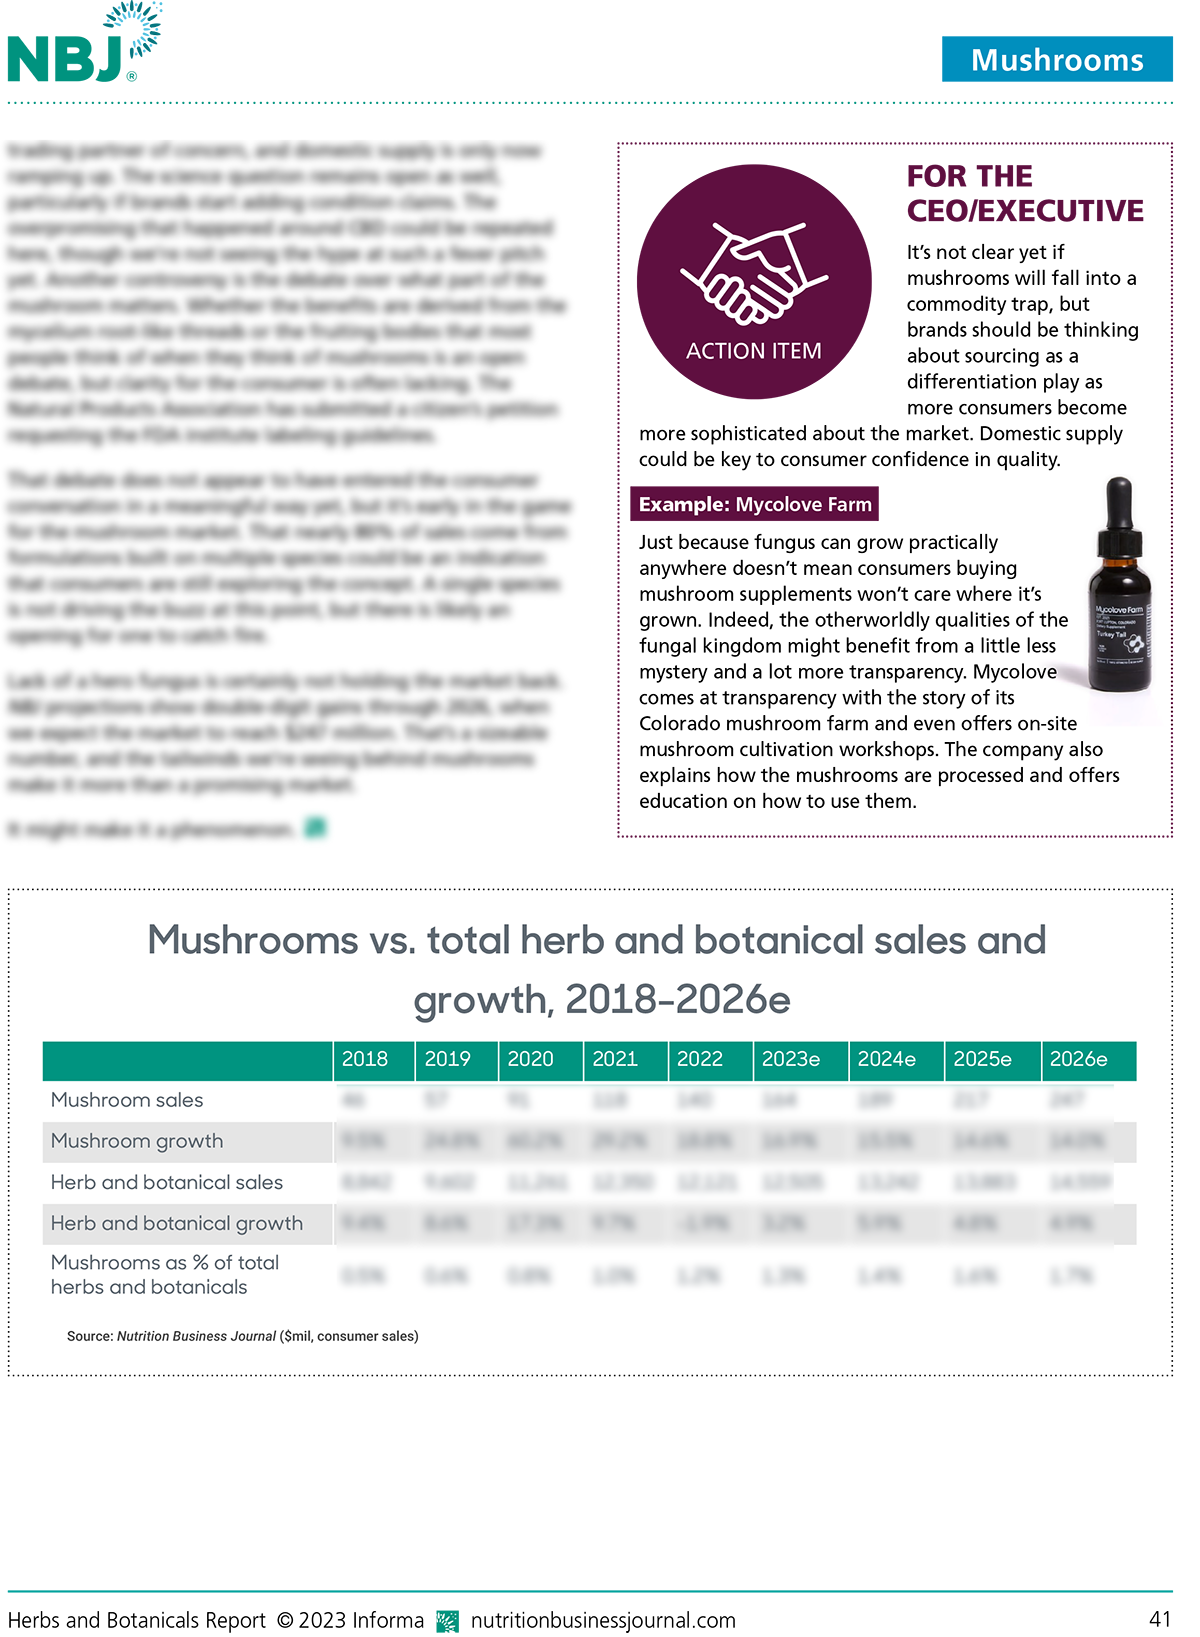 Herbs and Botanicals Report 2023